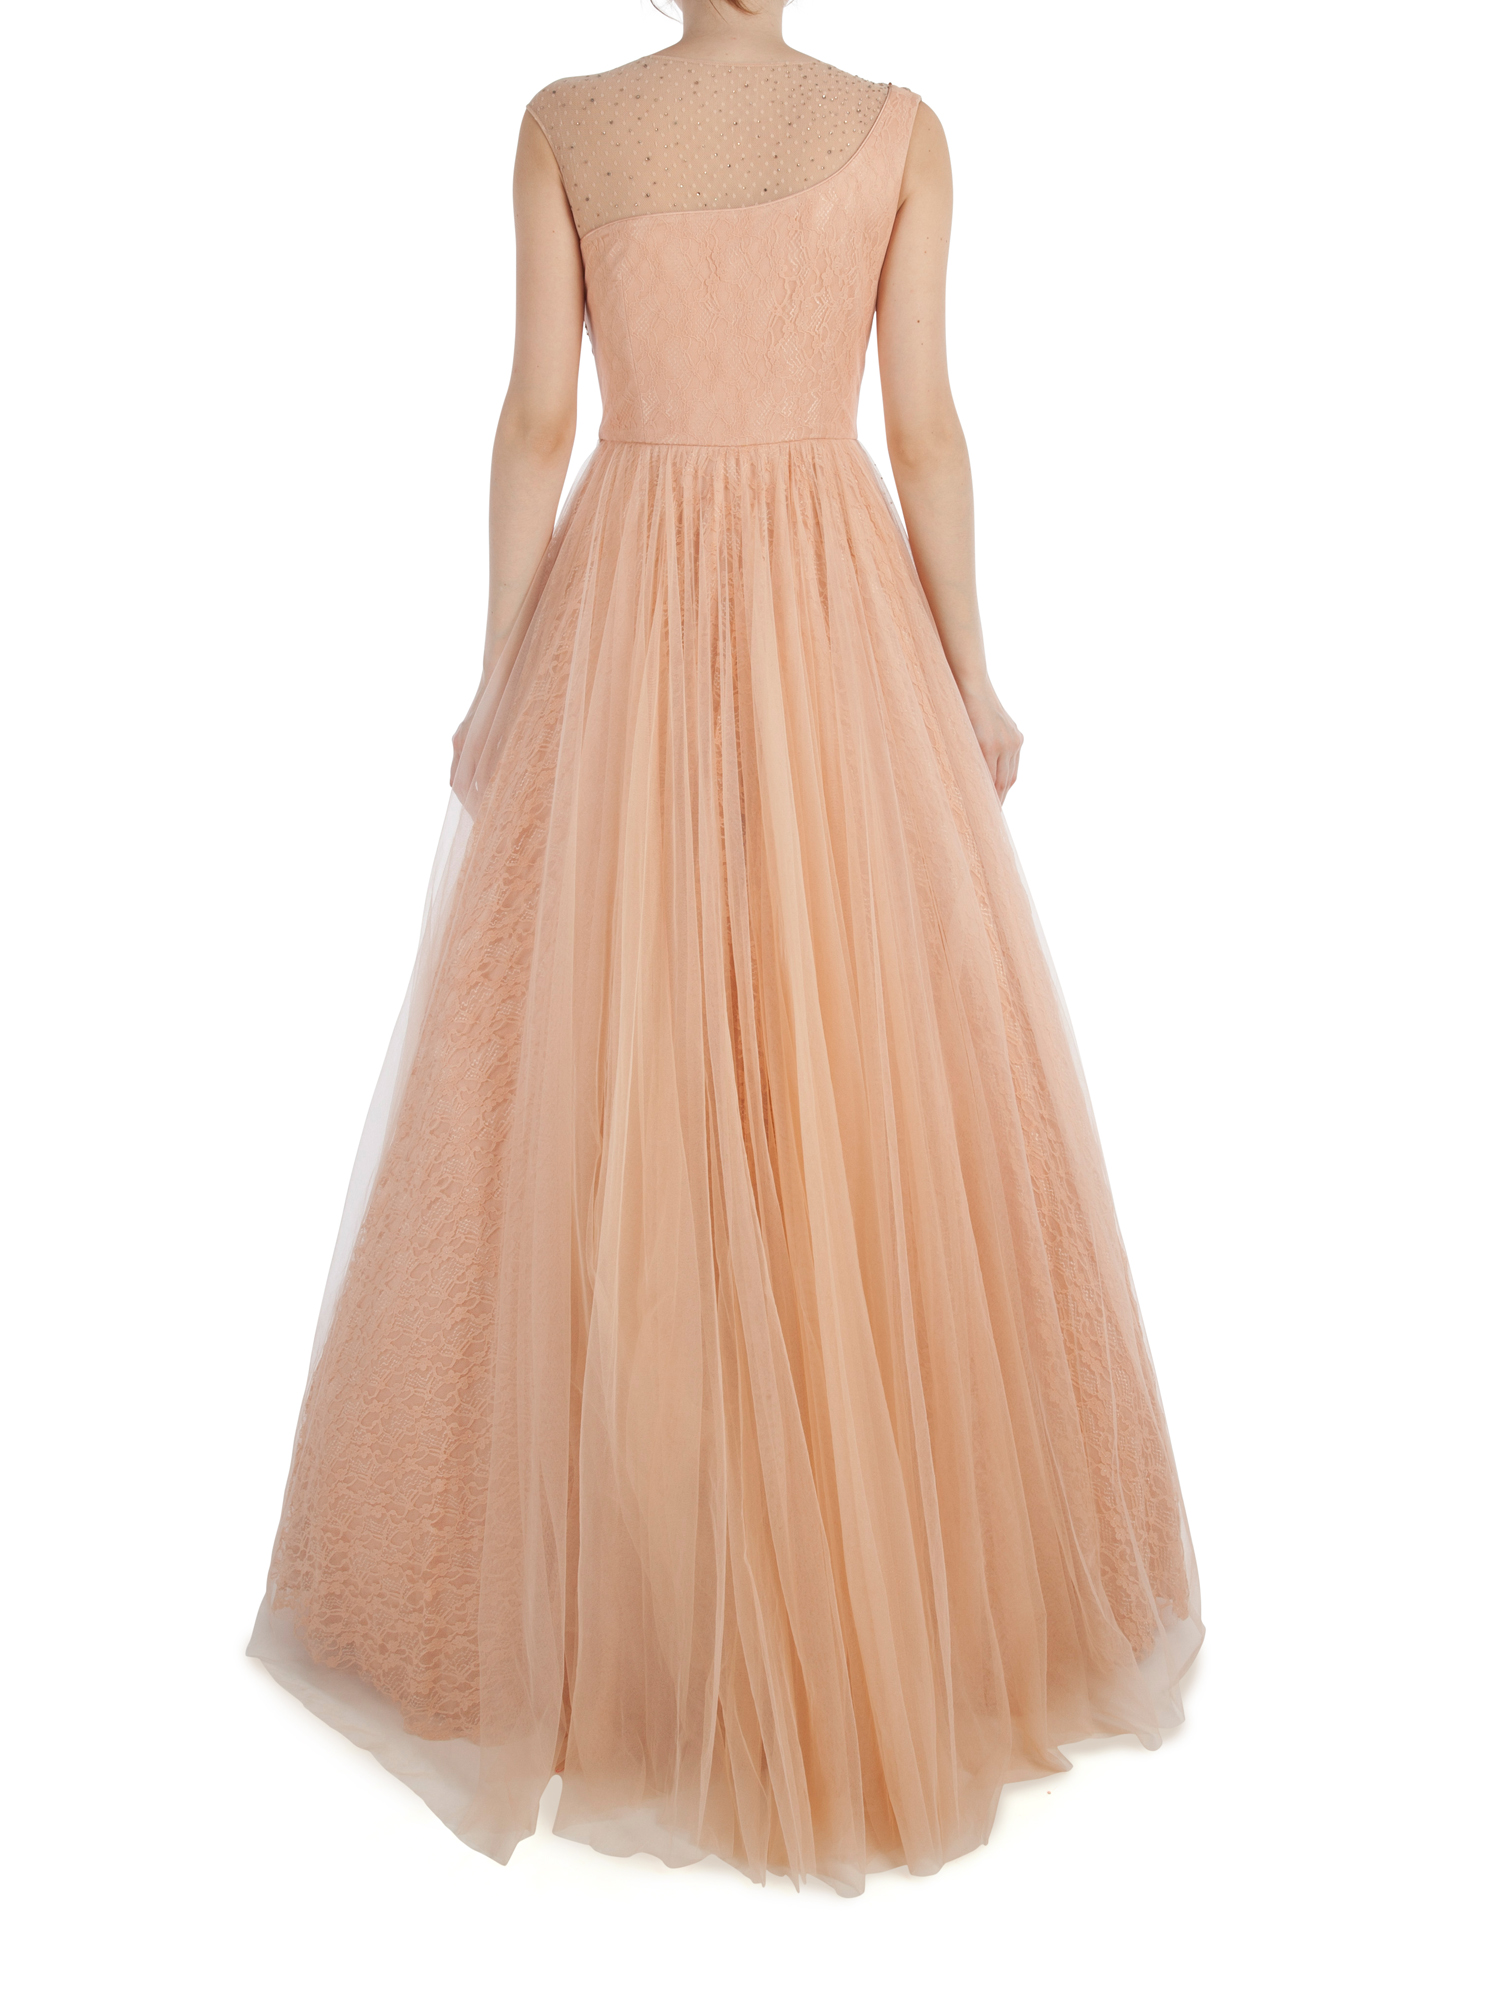 Peach demure crystal gown by Dolly J | The Secret Label